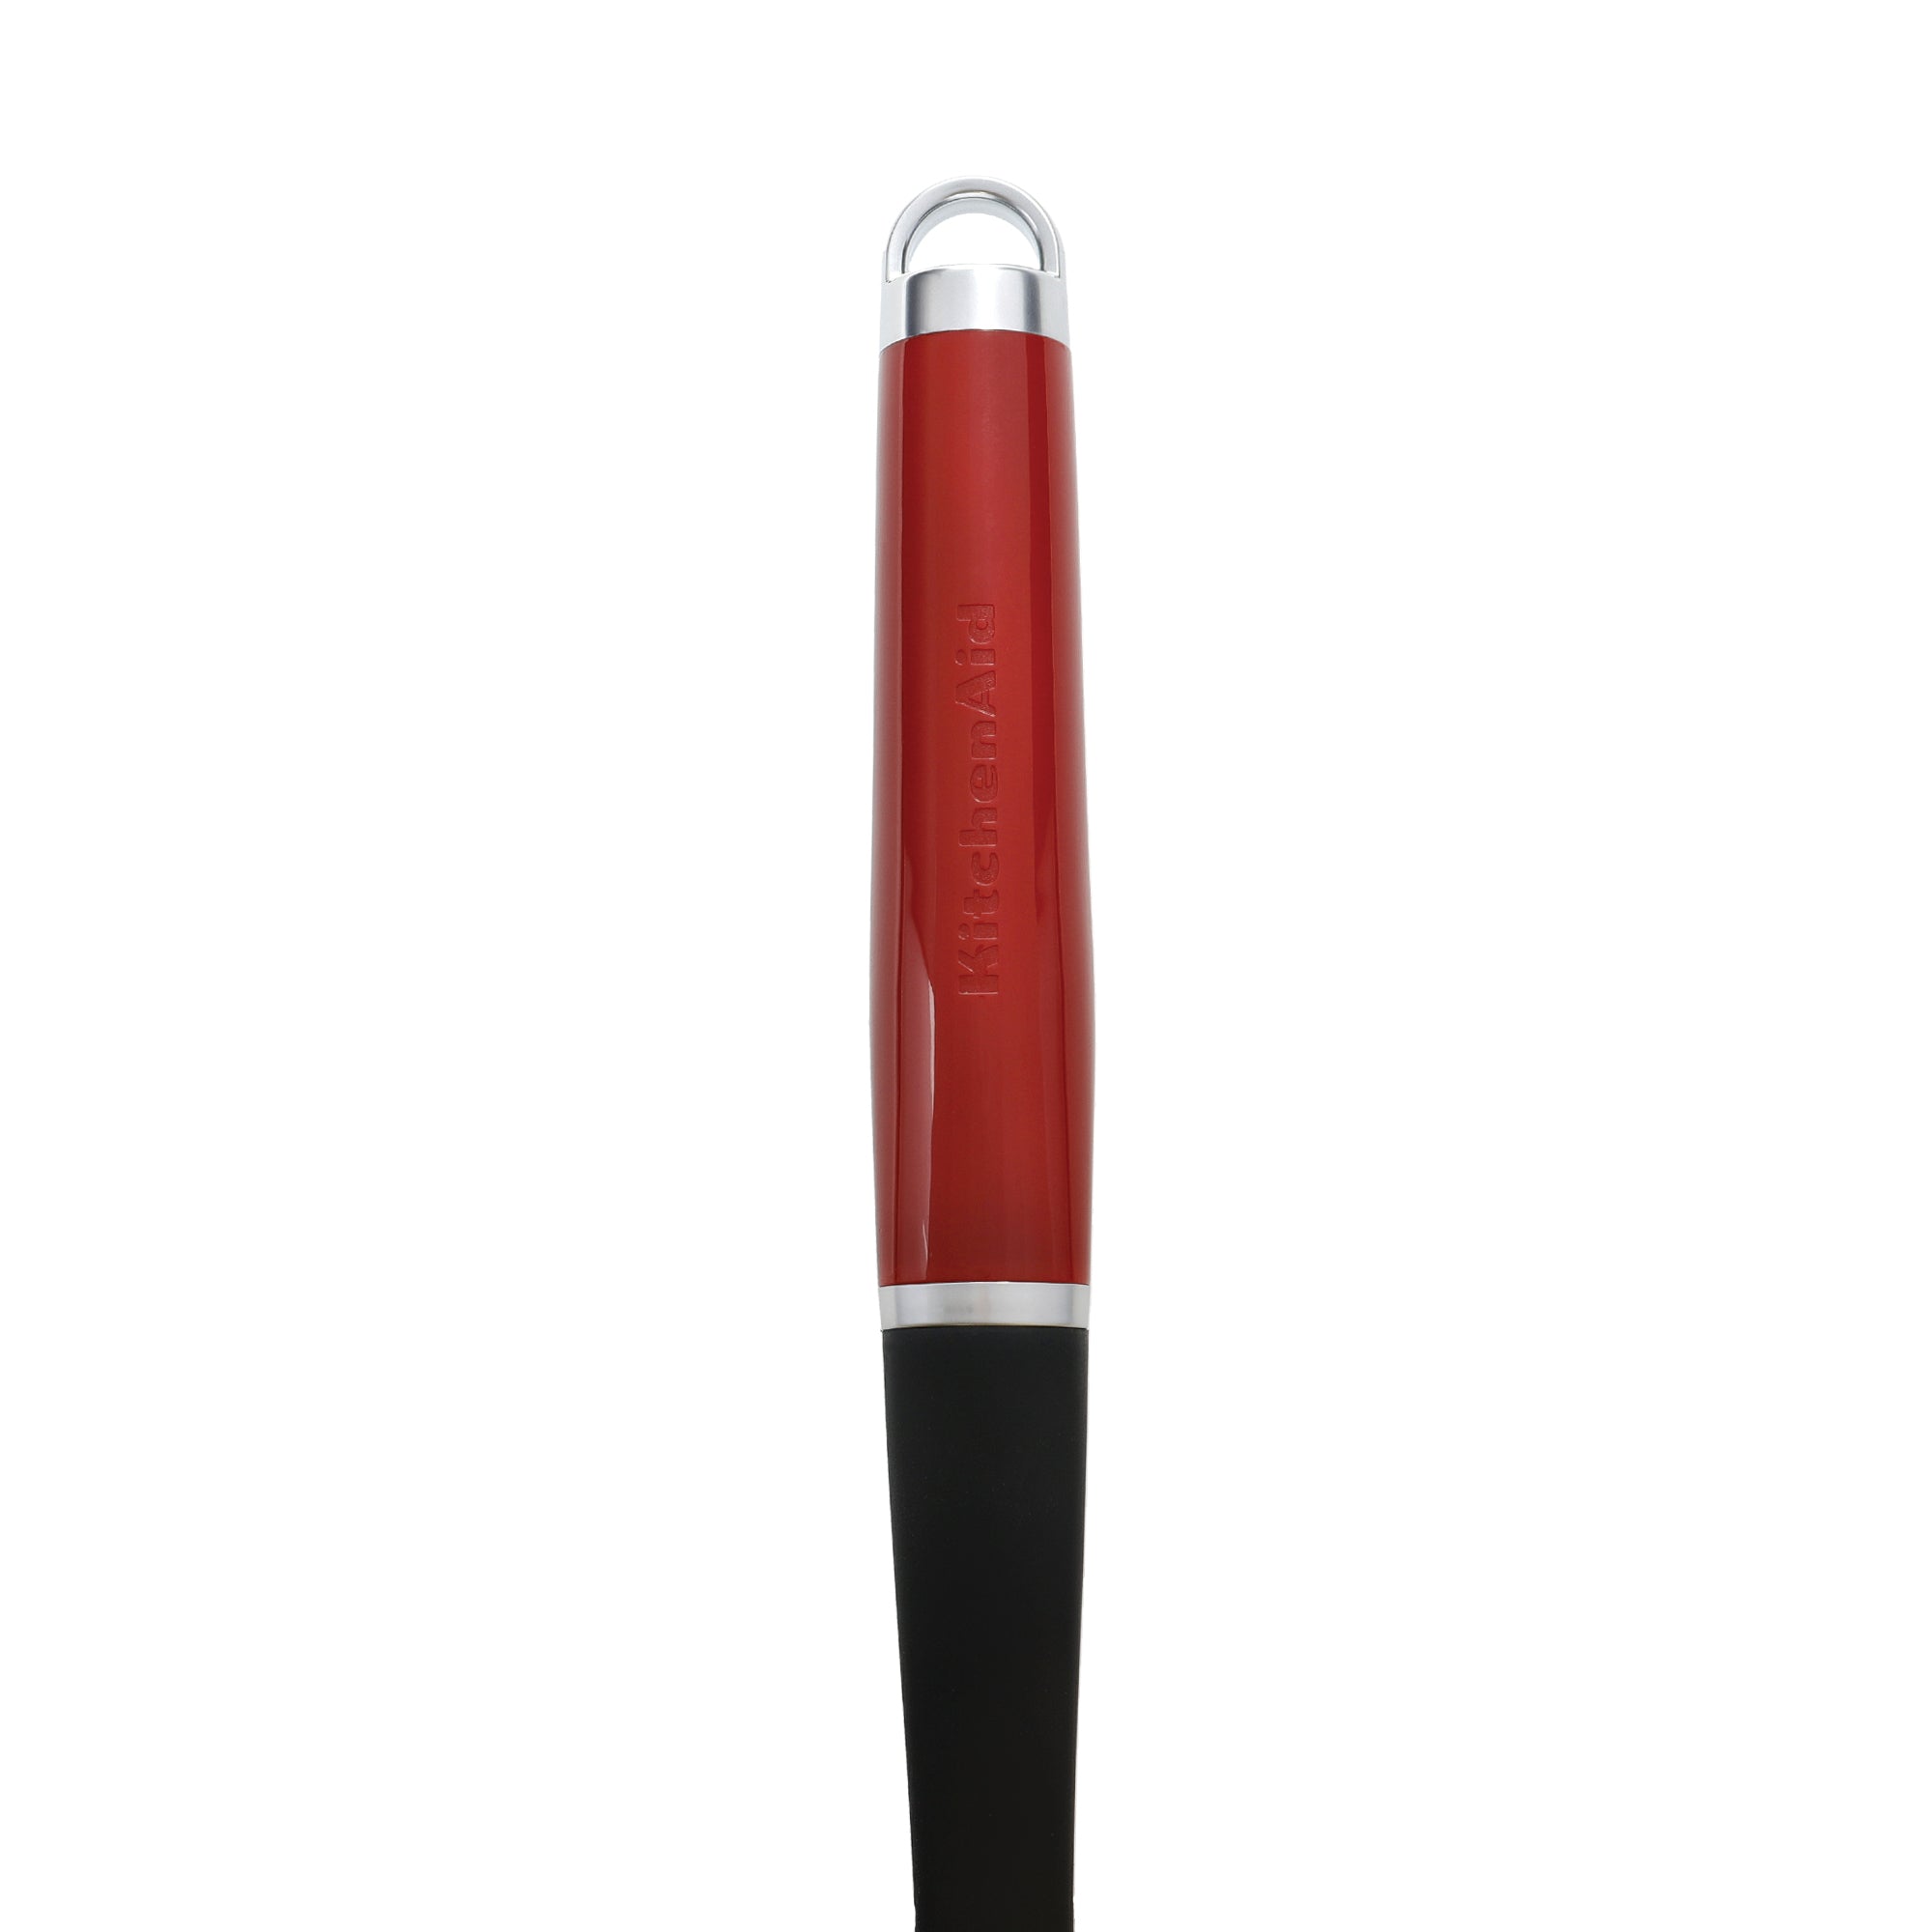 Coreline Slotted Spoon - Empire Red